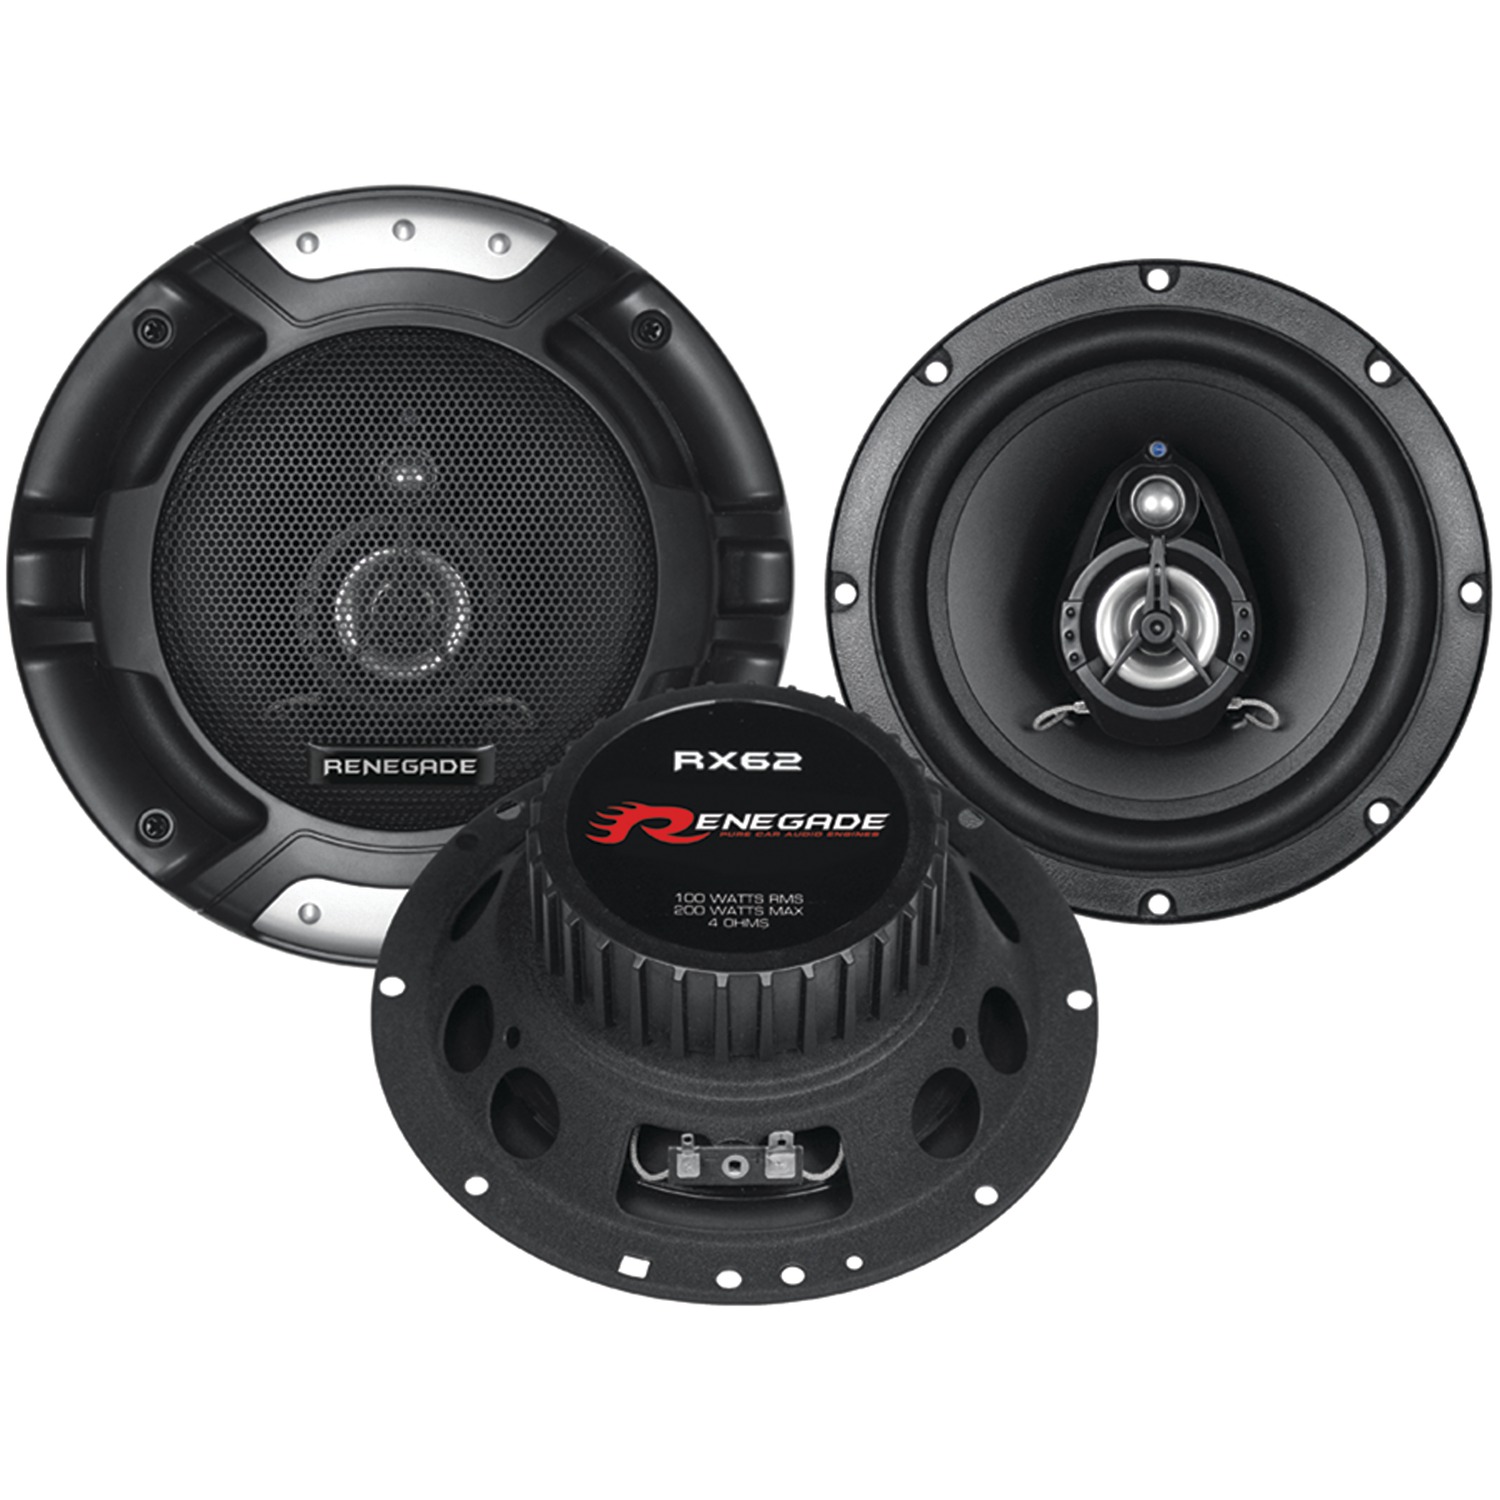 Renegade Rx62 Rx Series Full-range Coaxial Speakers (6.5", 2 Way) - image 5 of 5